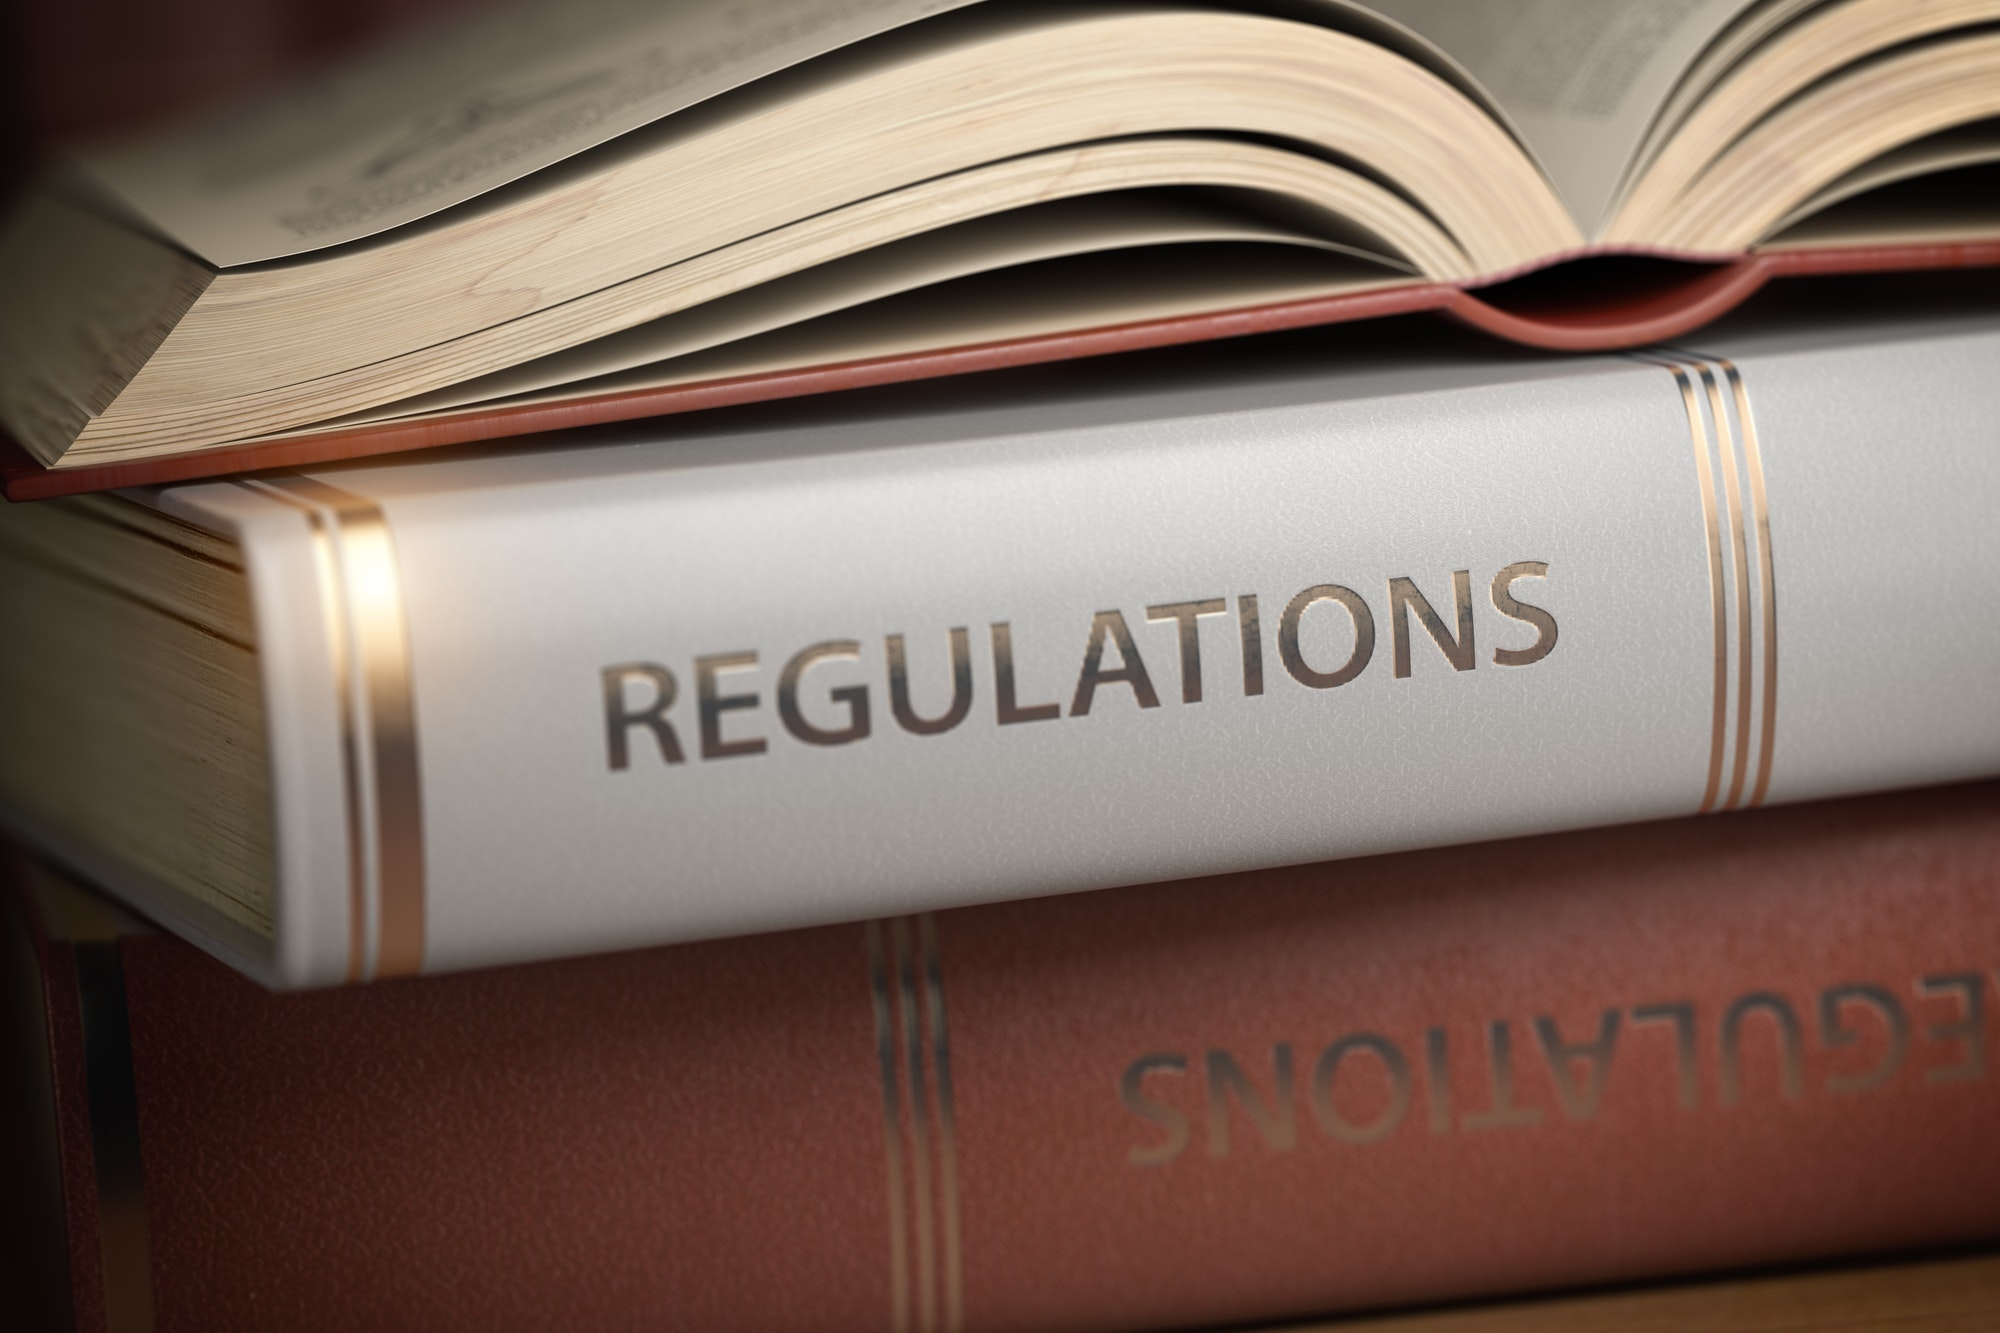 Regulations book. Law, rules and regulations concept.